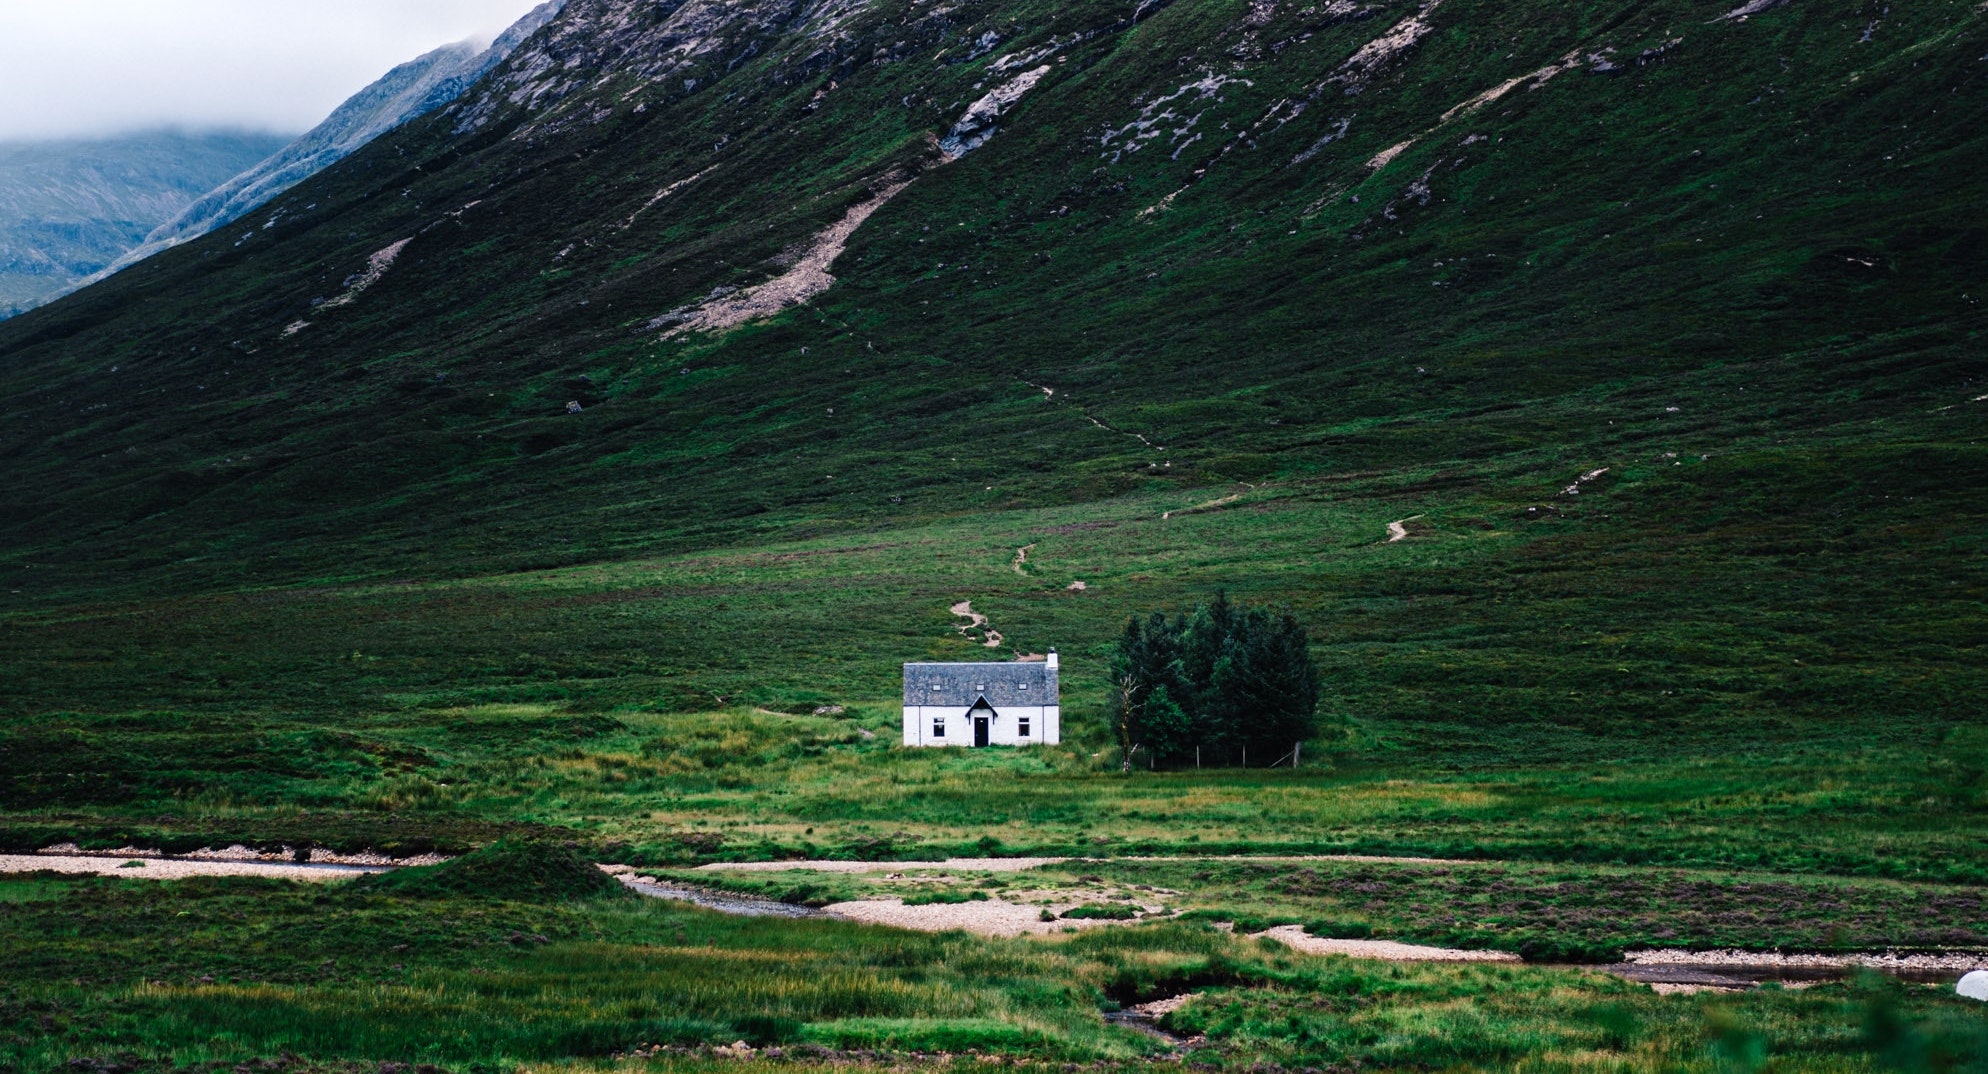 A small cabin sits alone in a desolate valley.